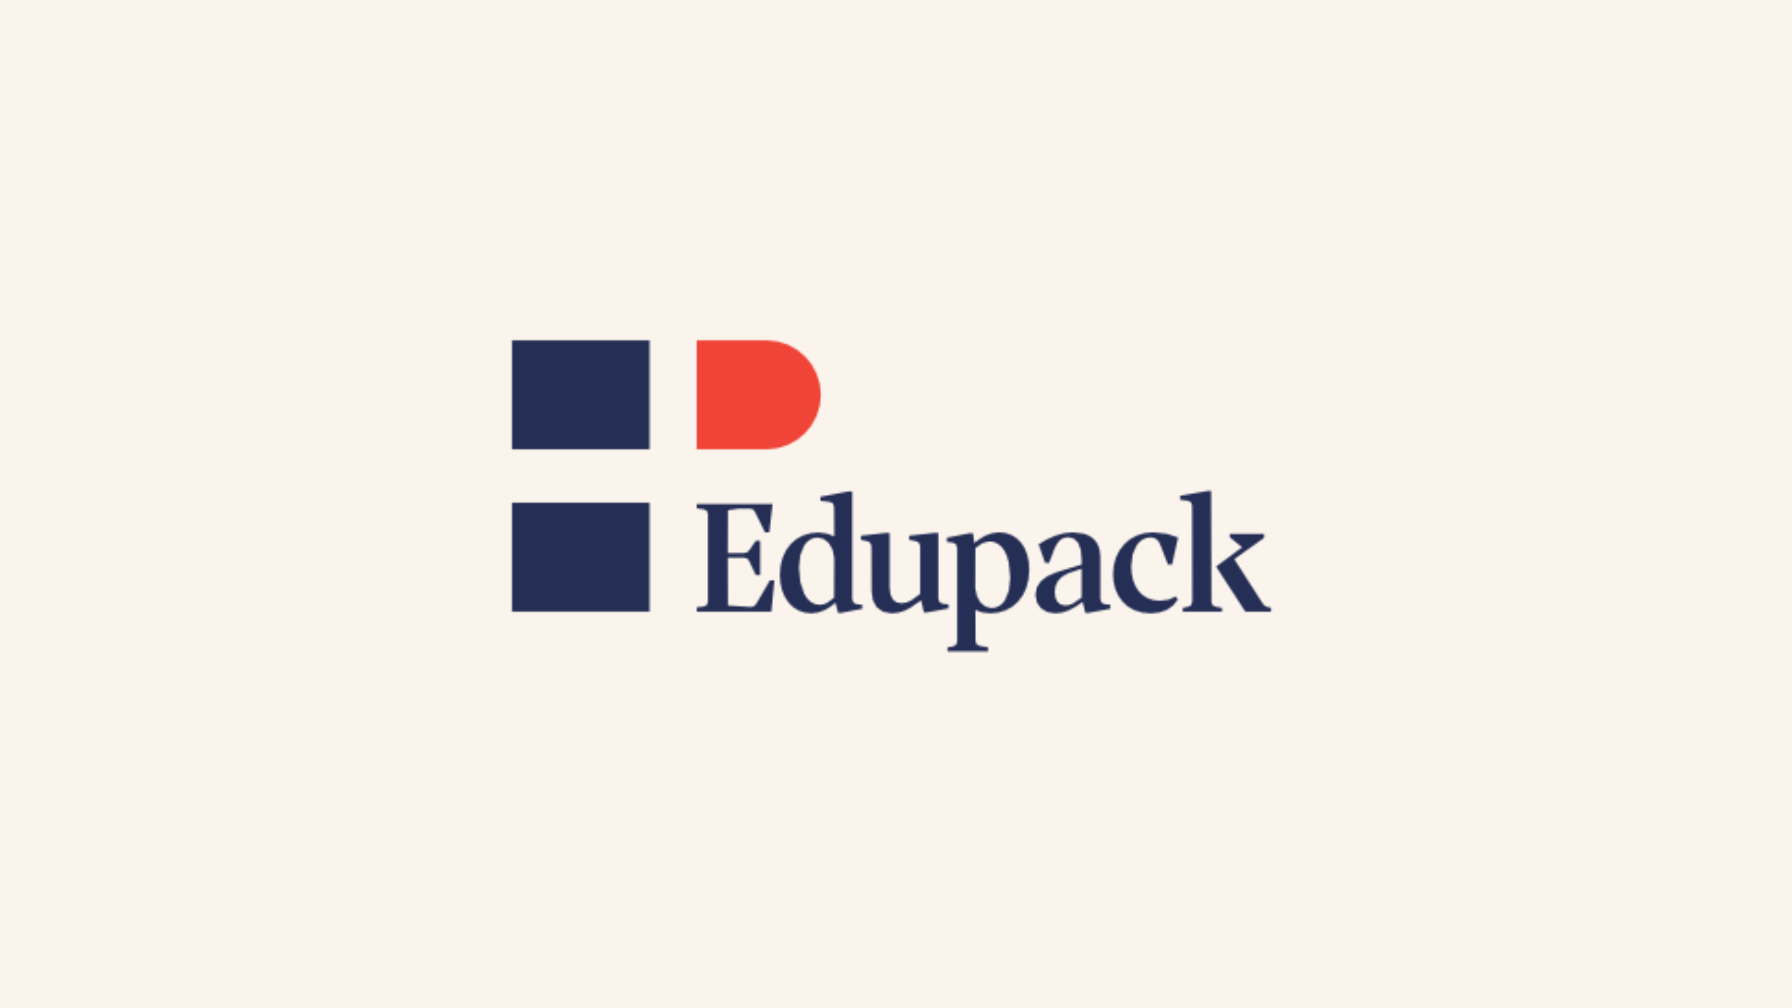 Edupack Is Tackling Higher Ed With WordPress, Looking for Development Partners